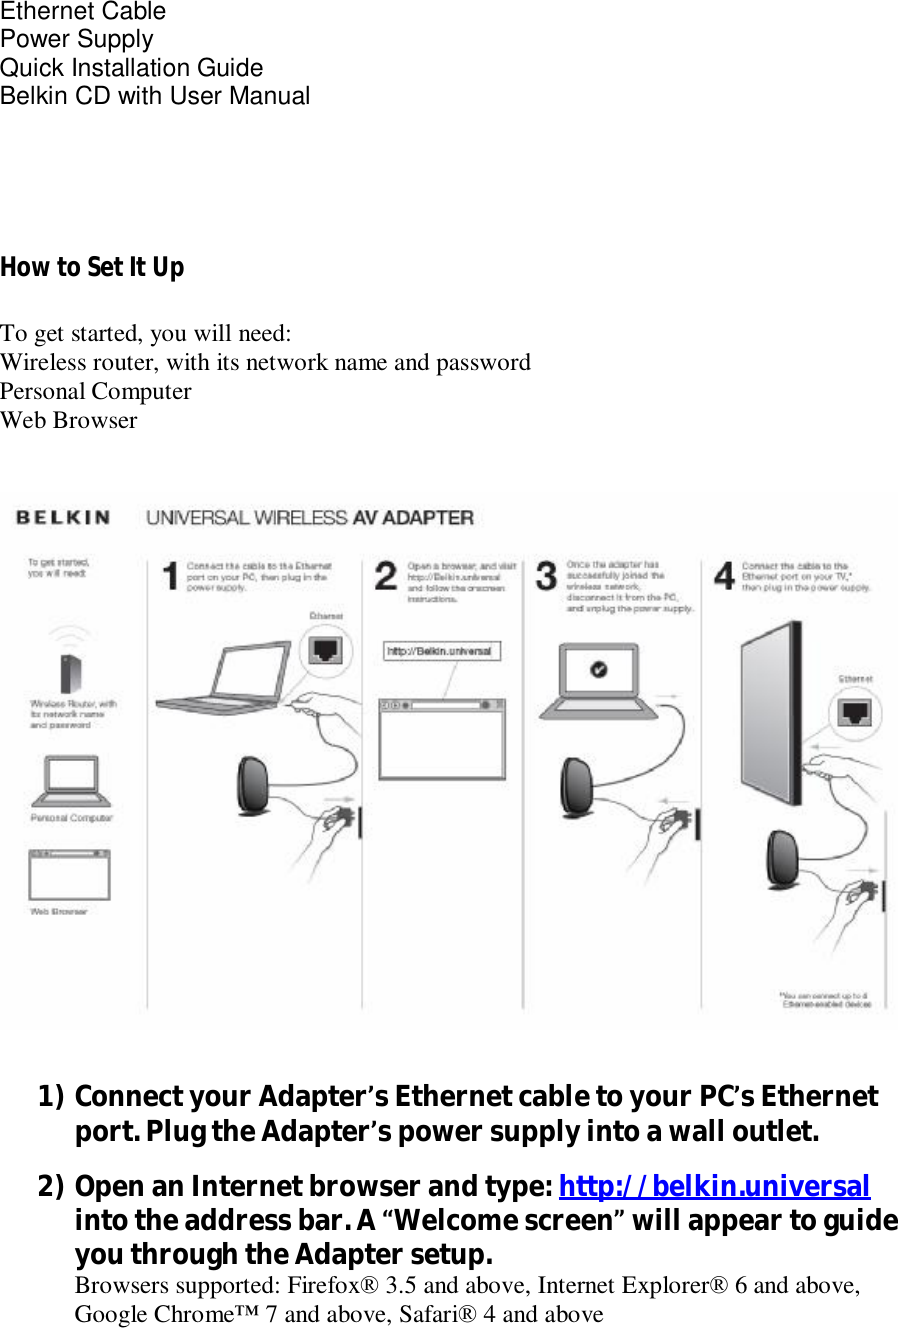   Ethernet Cable Power Supply   Quick Installation Guide Belkin CD with User Manual    How to Set It Up  To get started, you will need: Wireless router, with its network name and password Personal Computer Web Browser     1) Connect your Adapter’s Ethernet cable to your PC’s Ethernet port. Plug the Adapter’s power supply into a wall outlet. 2) Open an Internet browser and type: http://belkin.universal  into the address bar. A “Welcome screen” will appear to guide you through the Adapter setup. Browsers supported: Firefox® 3.5 and above, Internet Explorer® 6 and above, Google Chrome™ 7 and above, Safari® 4 and above 